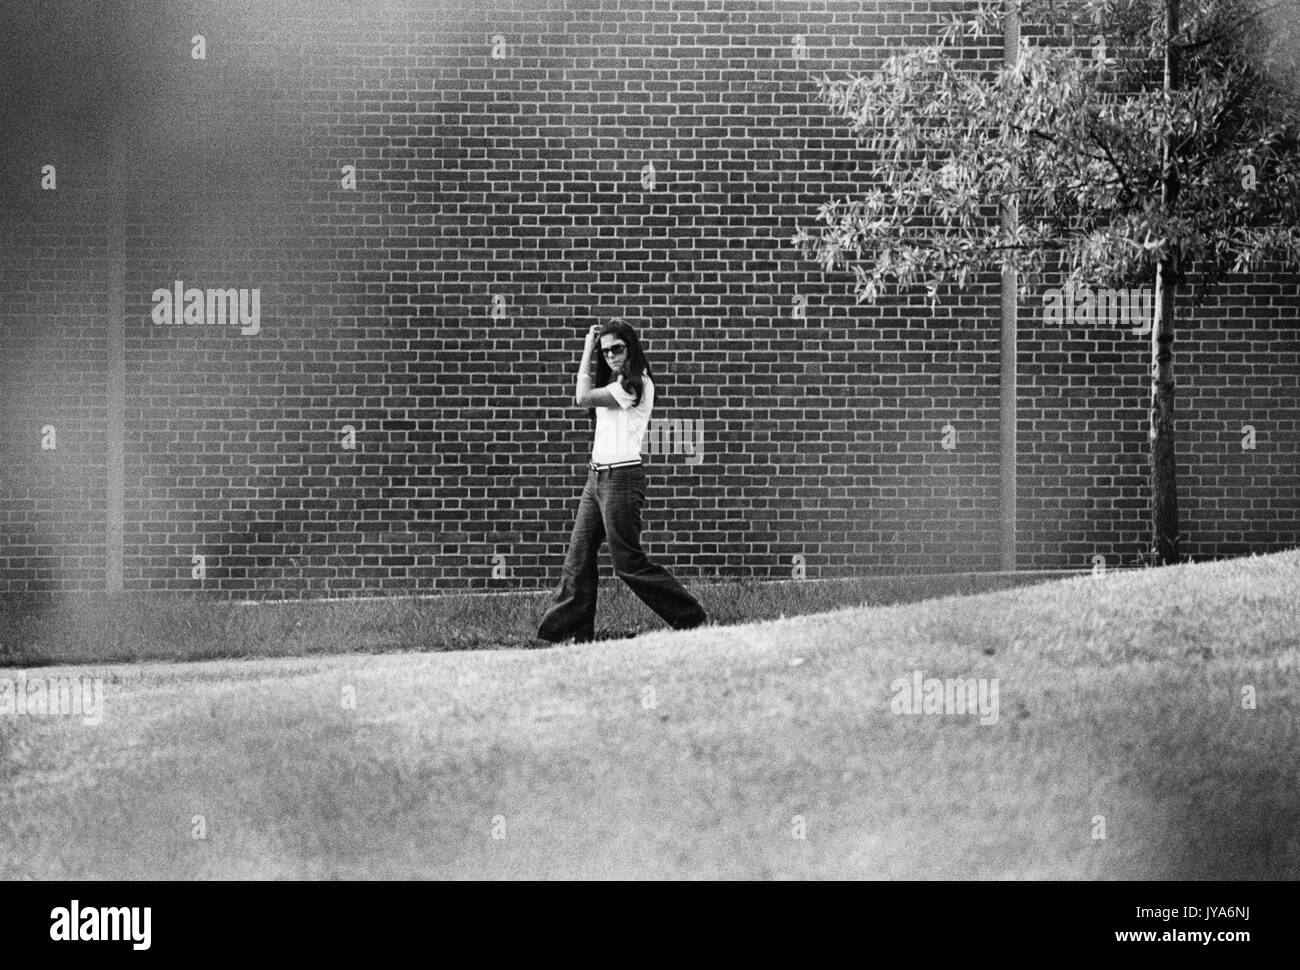 A photograph of a female undergraduate walking across the campus of Johns Hopkins University during the first years of the undergraduate program's admittance of women, in Baltimore, Maryland. 1970. Stock Photo